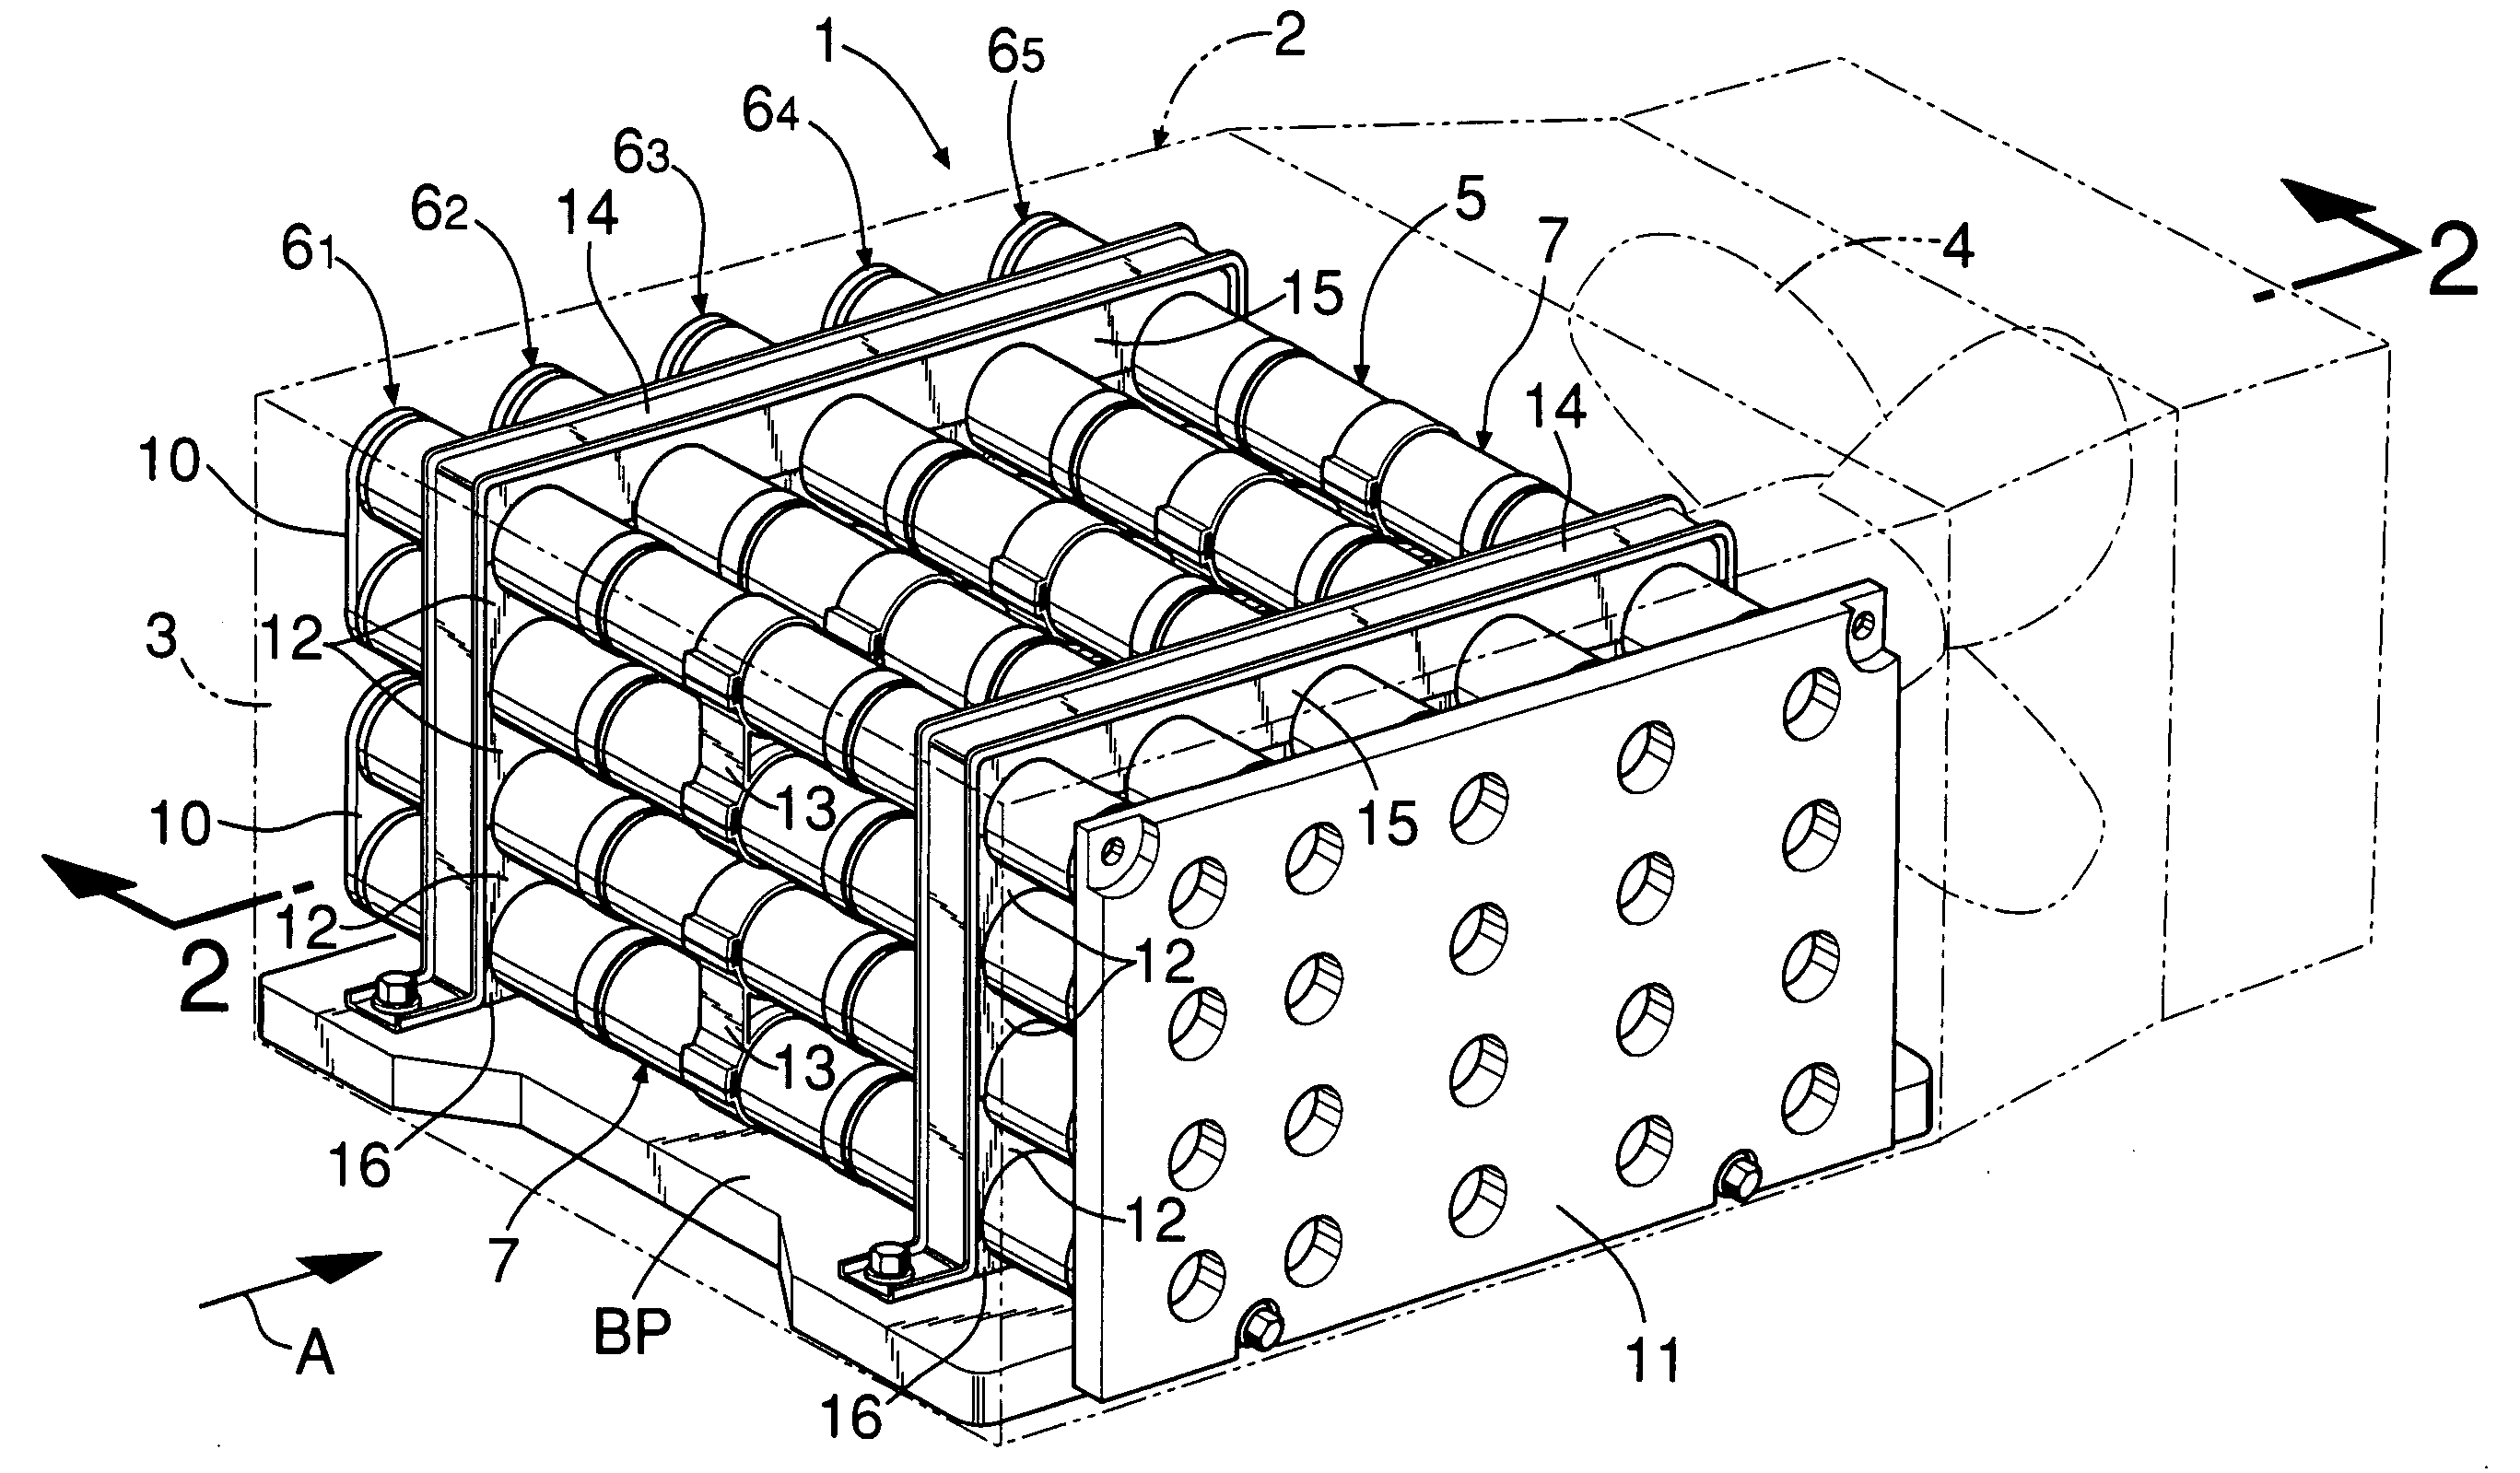 Battery-driven power source apparatus